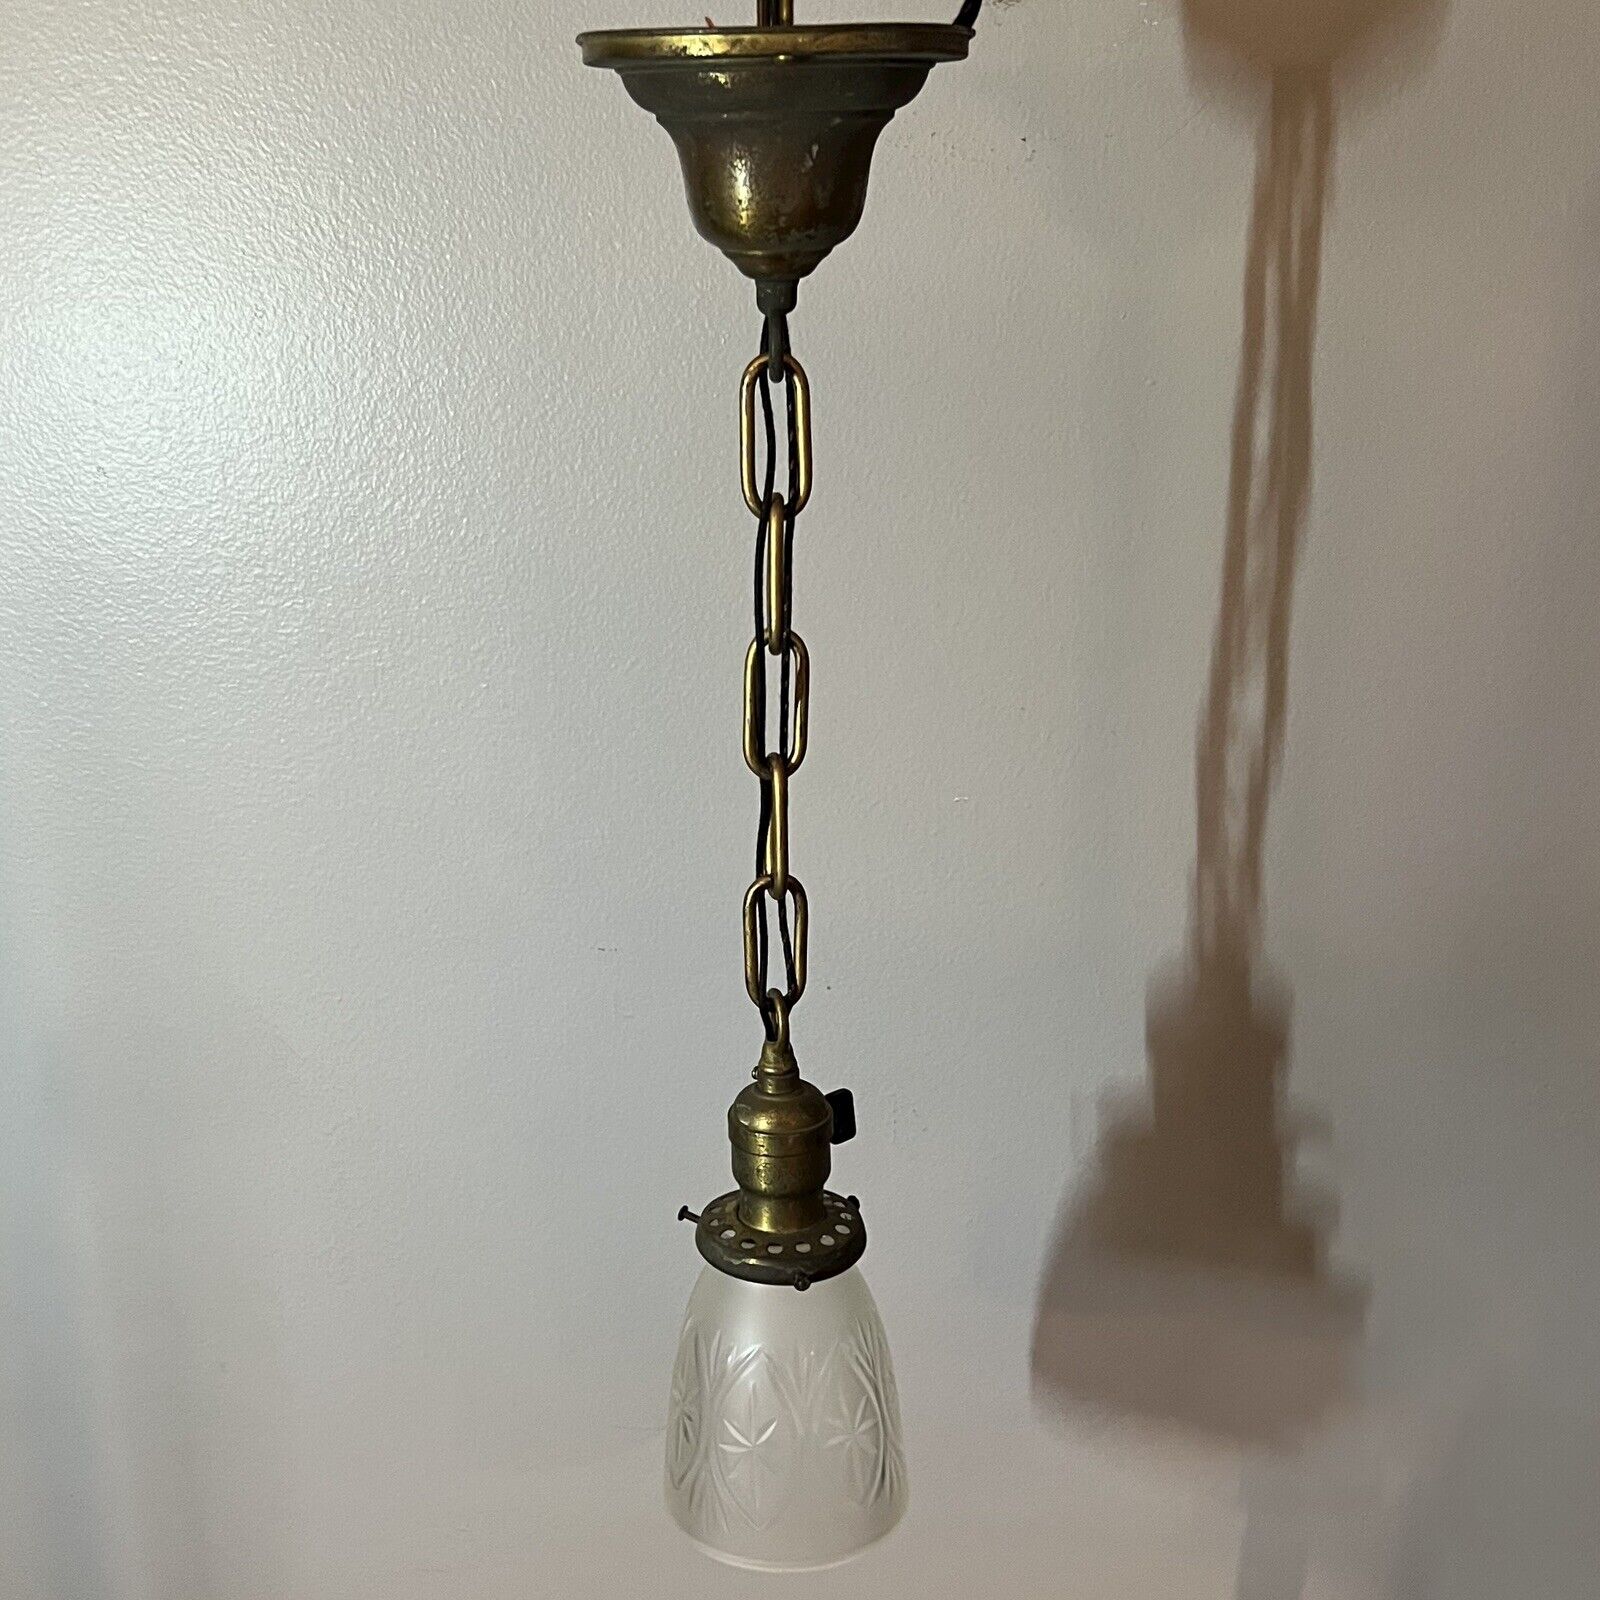 Single Antique Pendant Weathered Brass Rewired Etched Frosted Shade 3M